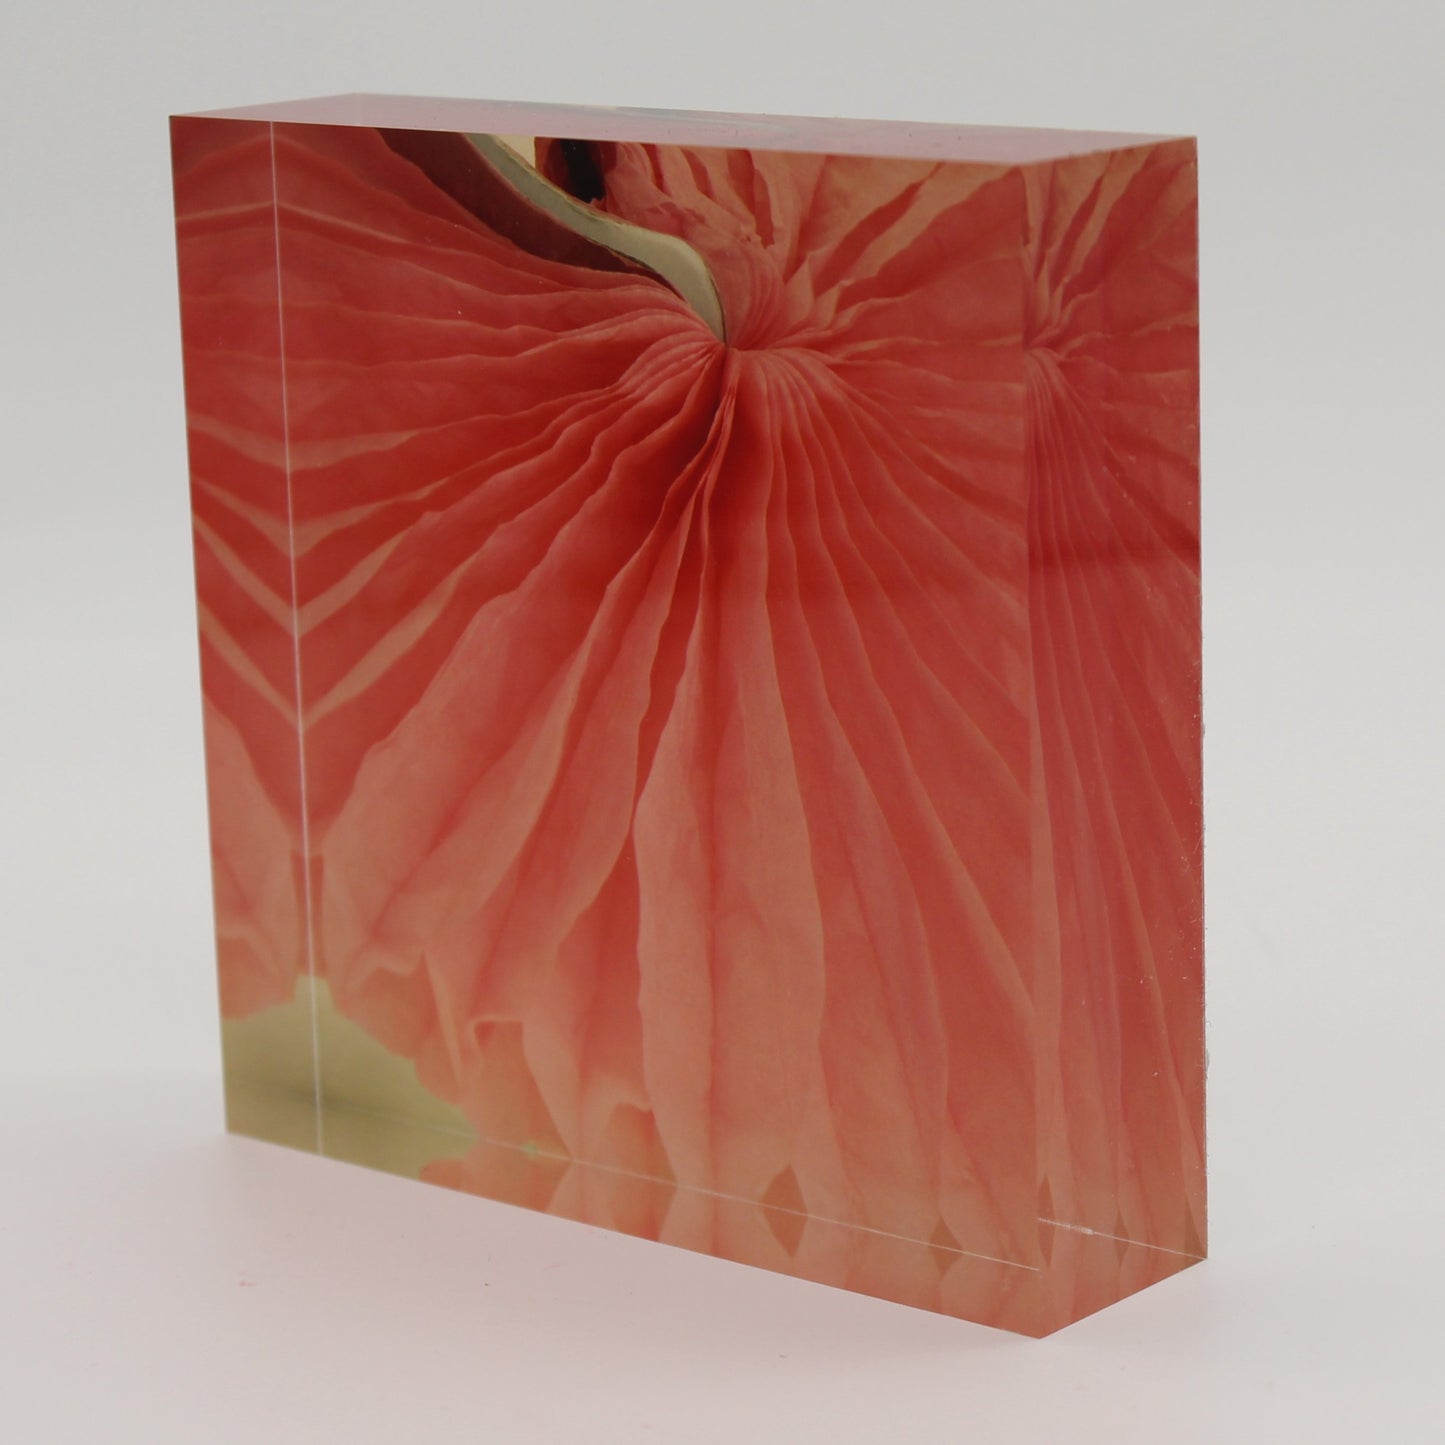 Tilted view of Acrylic block picture of pink swirled flower